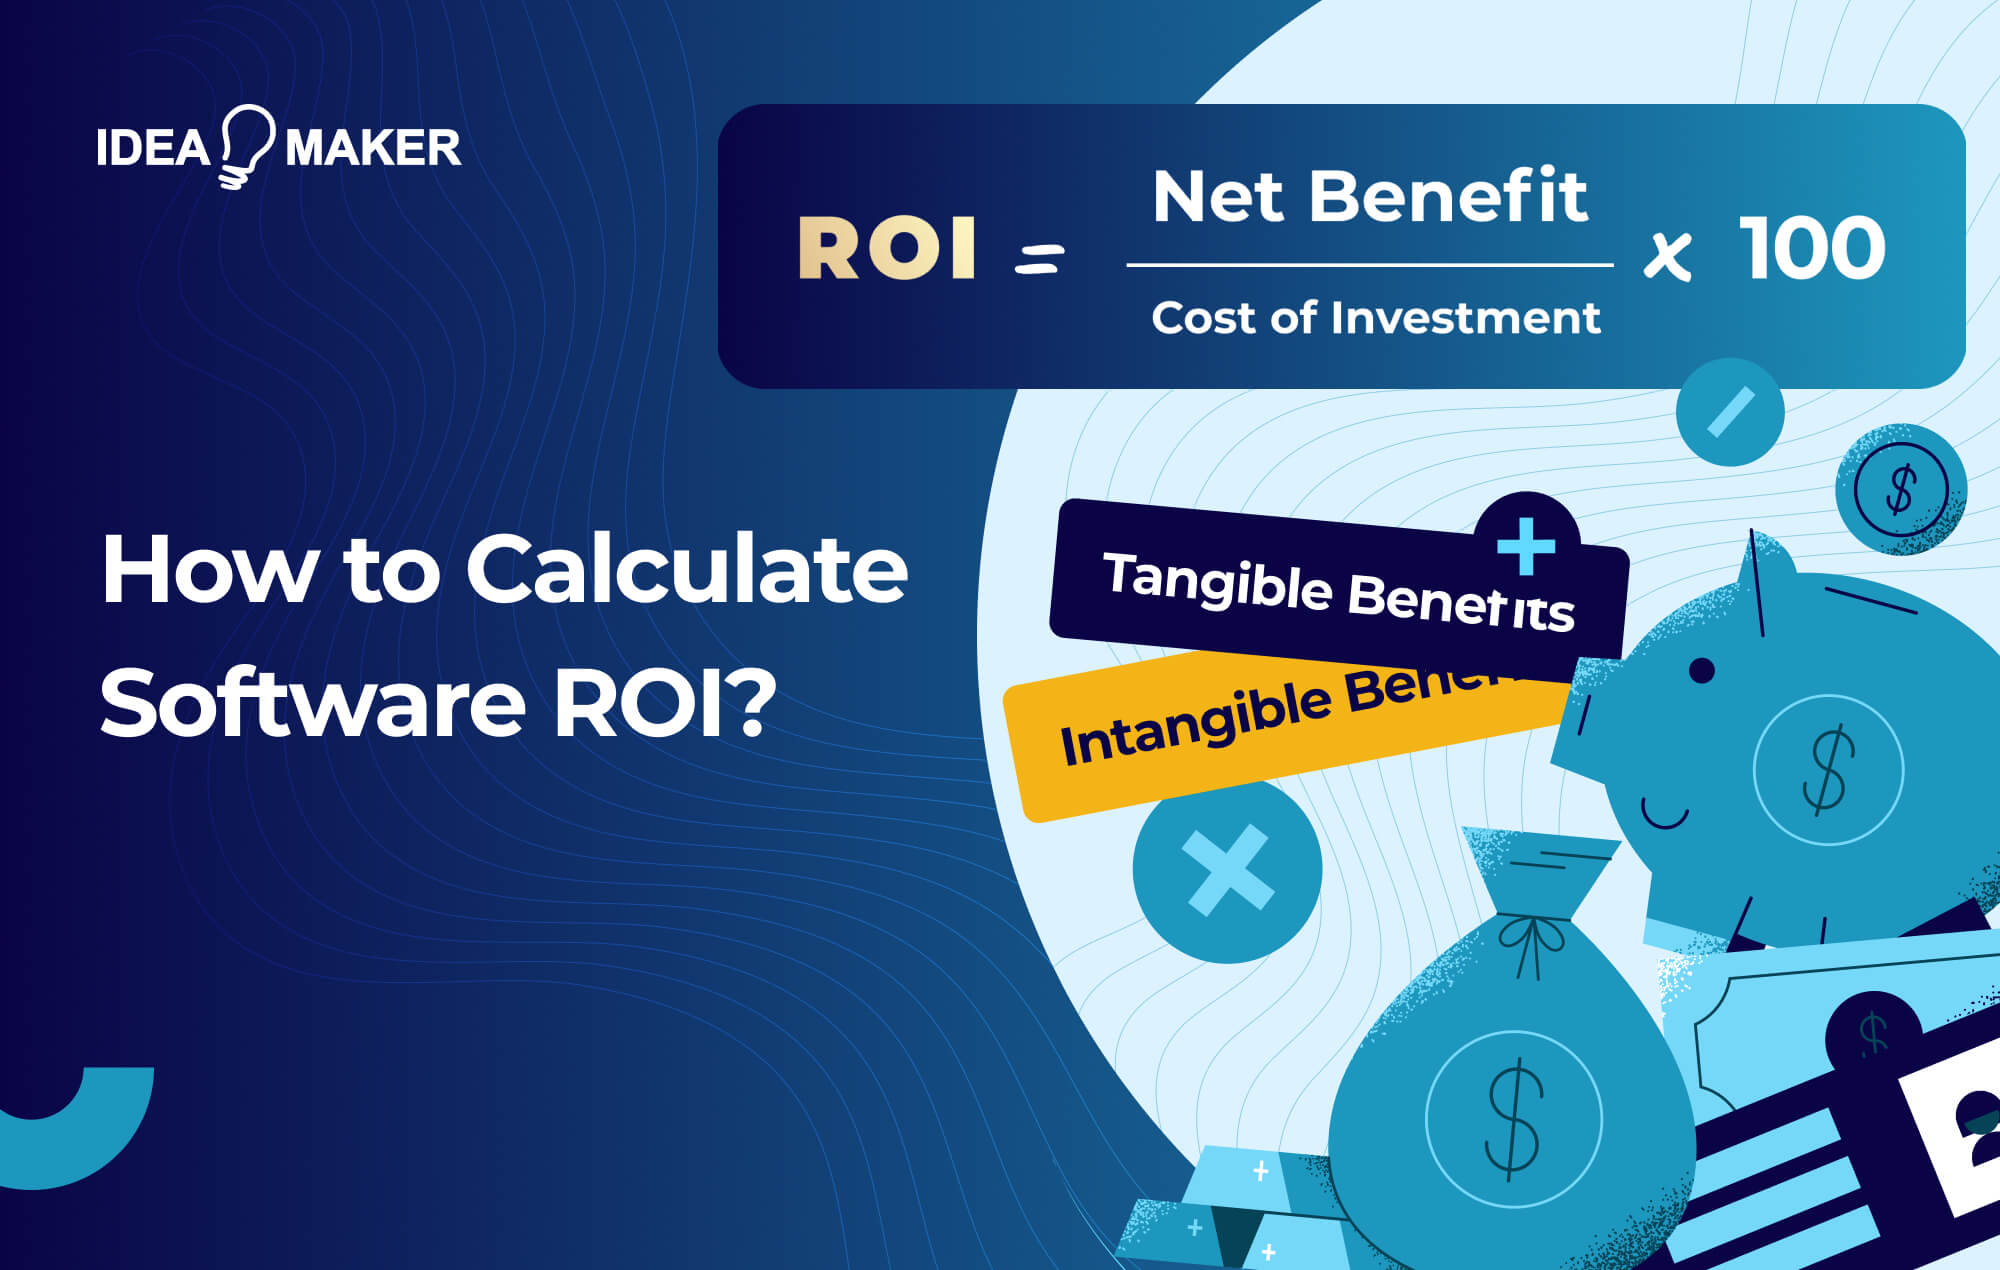 How to Calculate Software ROI?